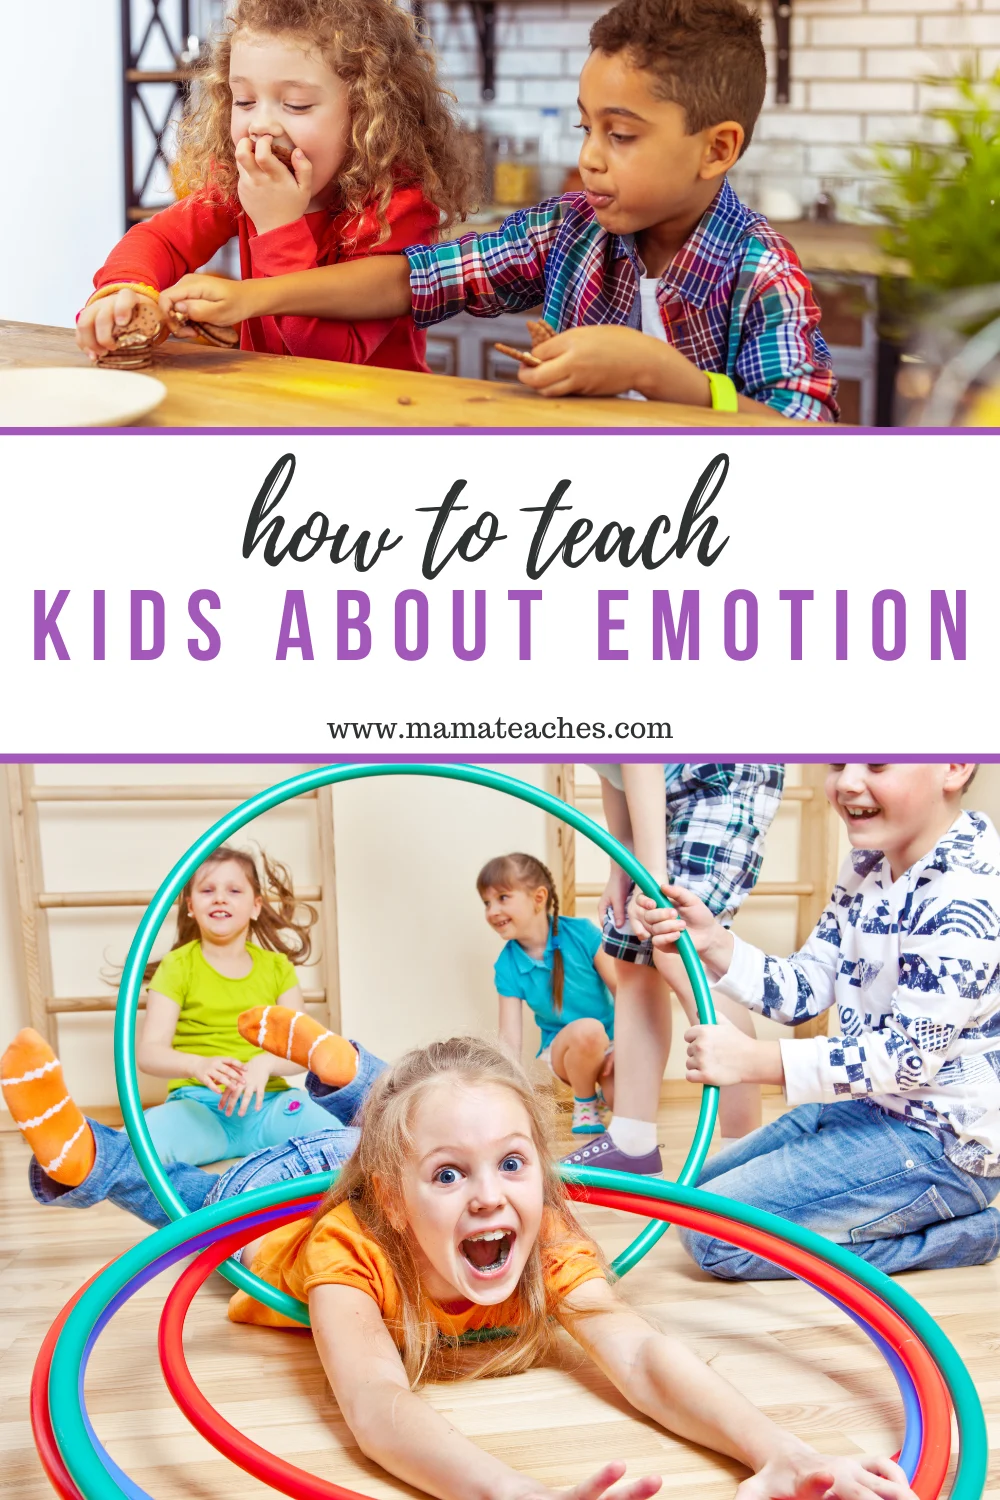 How to Teach Kids About Emotions